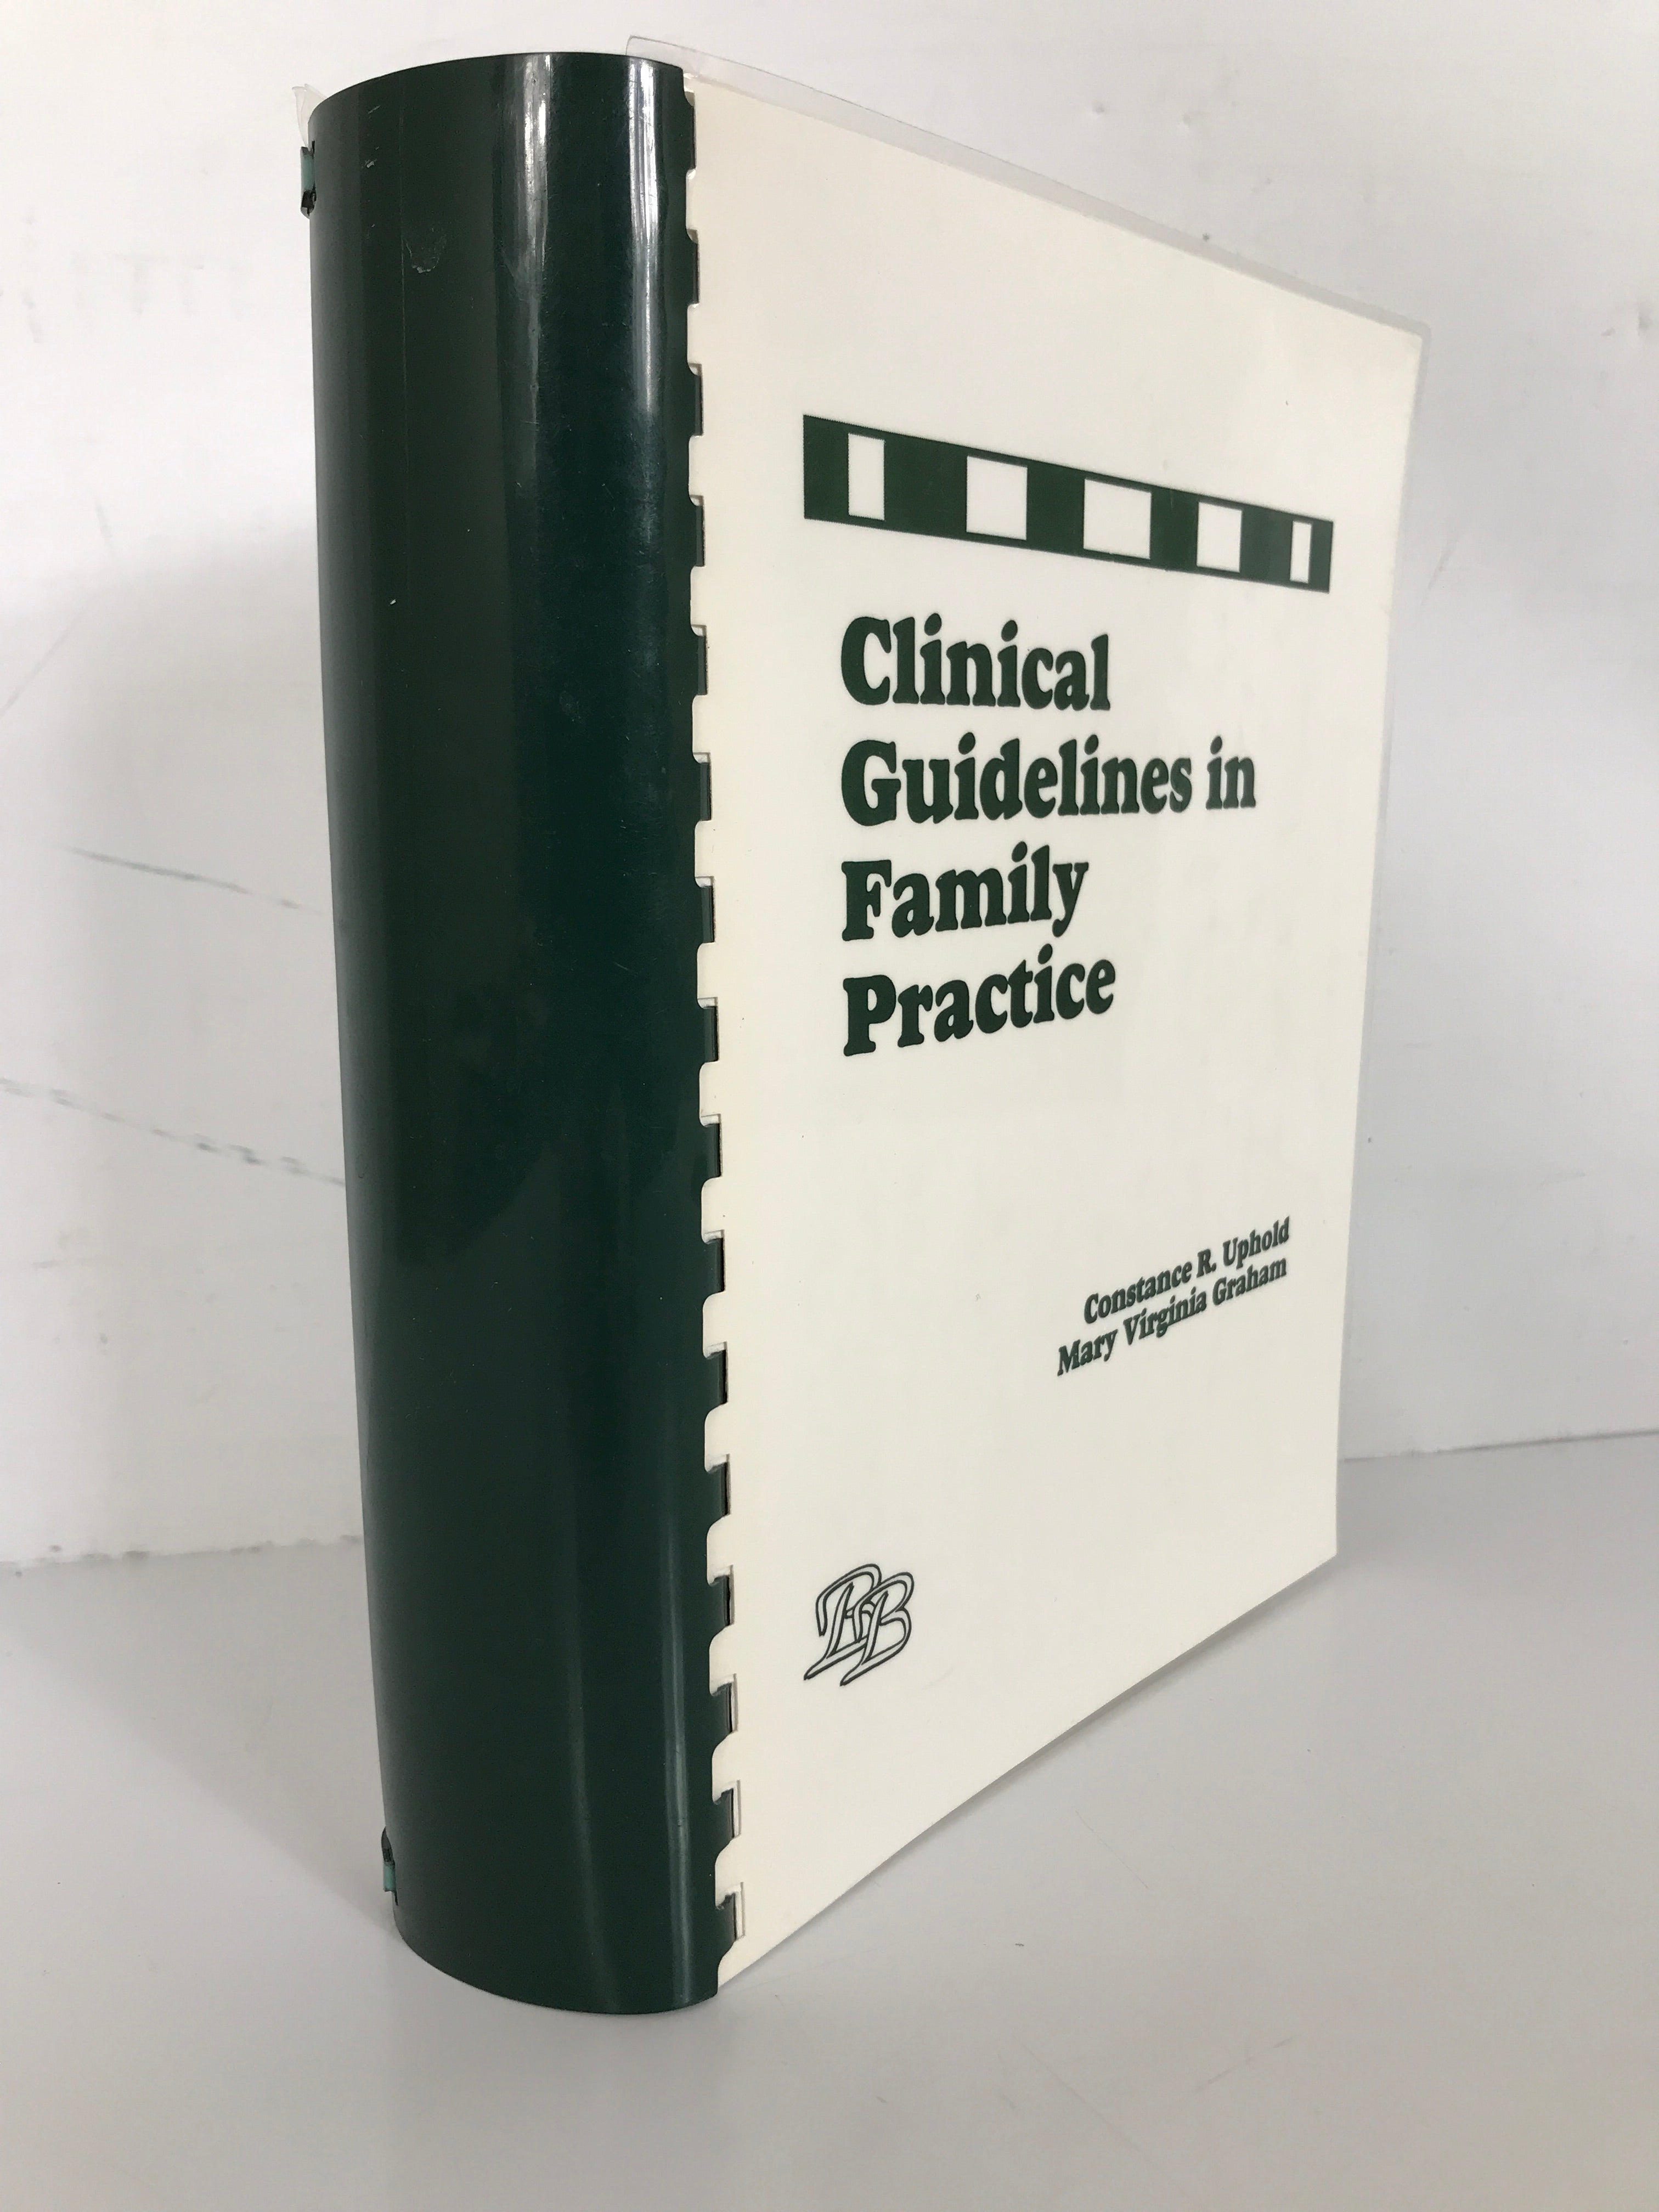 Clinical Guidelines in Family Practice; Uphold & Graham 2nd Ed 1994 Spiral Bound